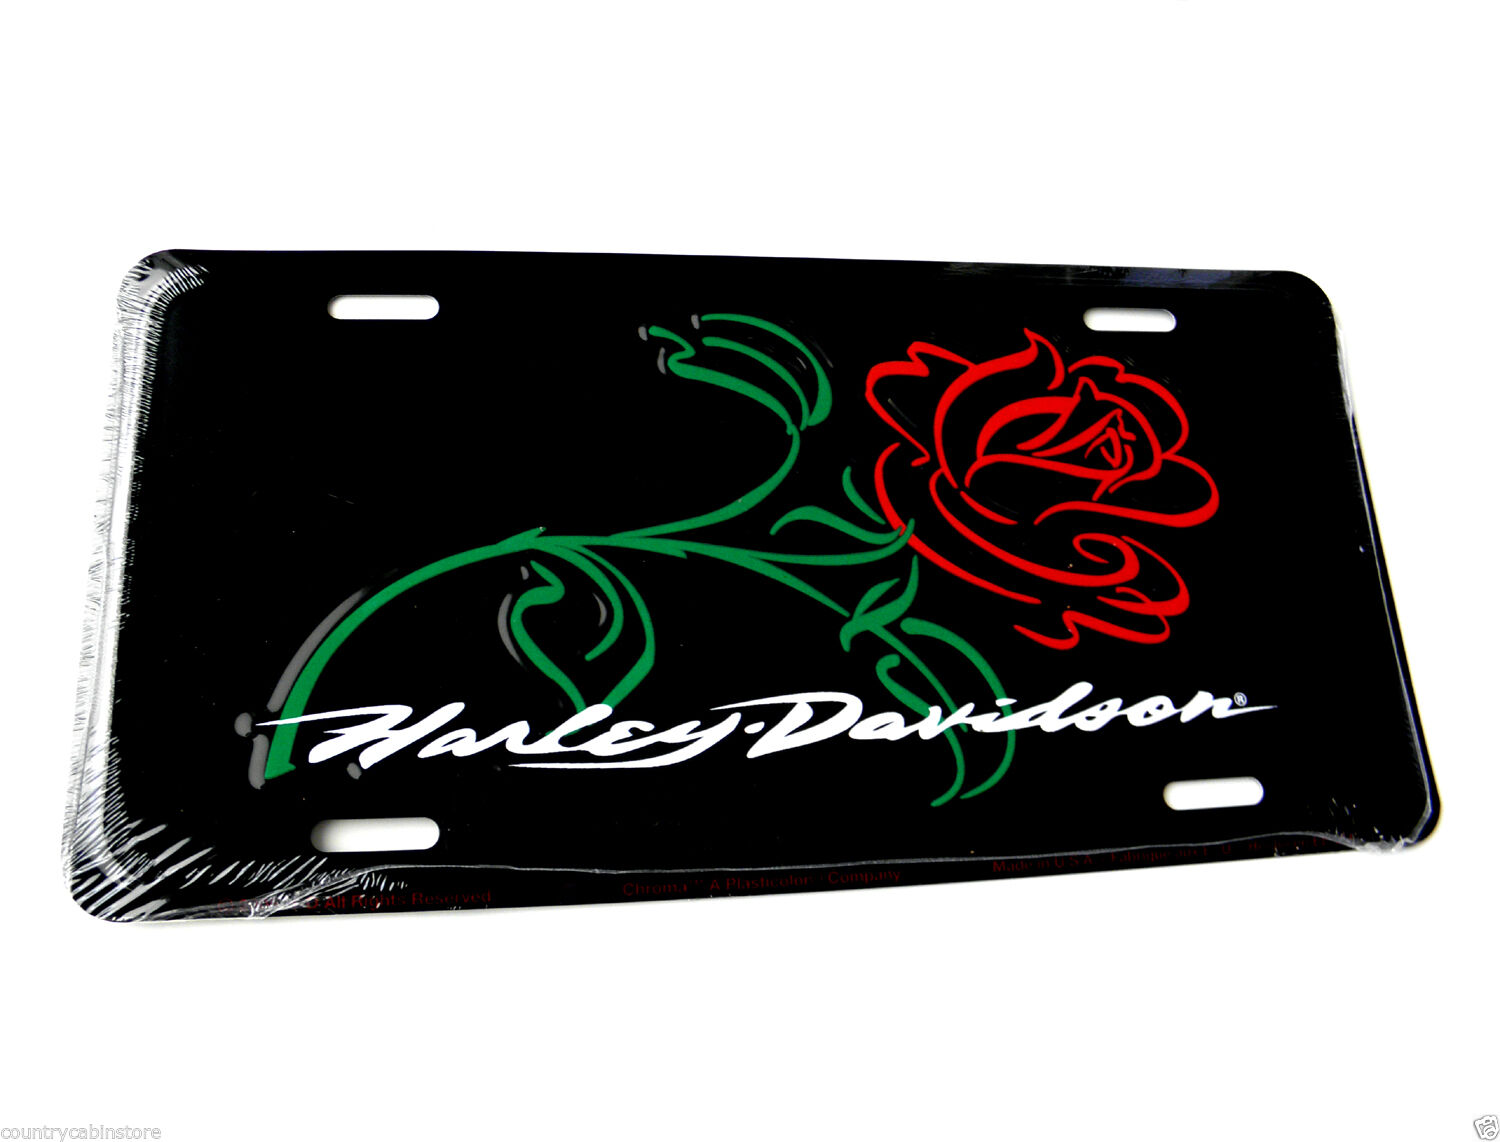 Harley Davidson ROSE Embossed Car Auto License Plate Tag 6 X 12